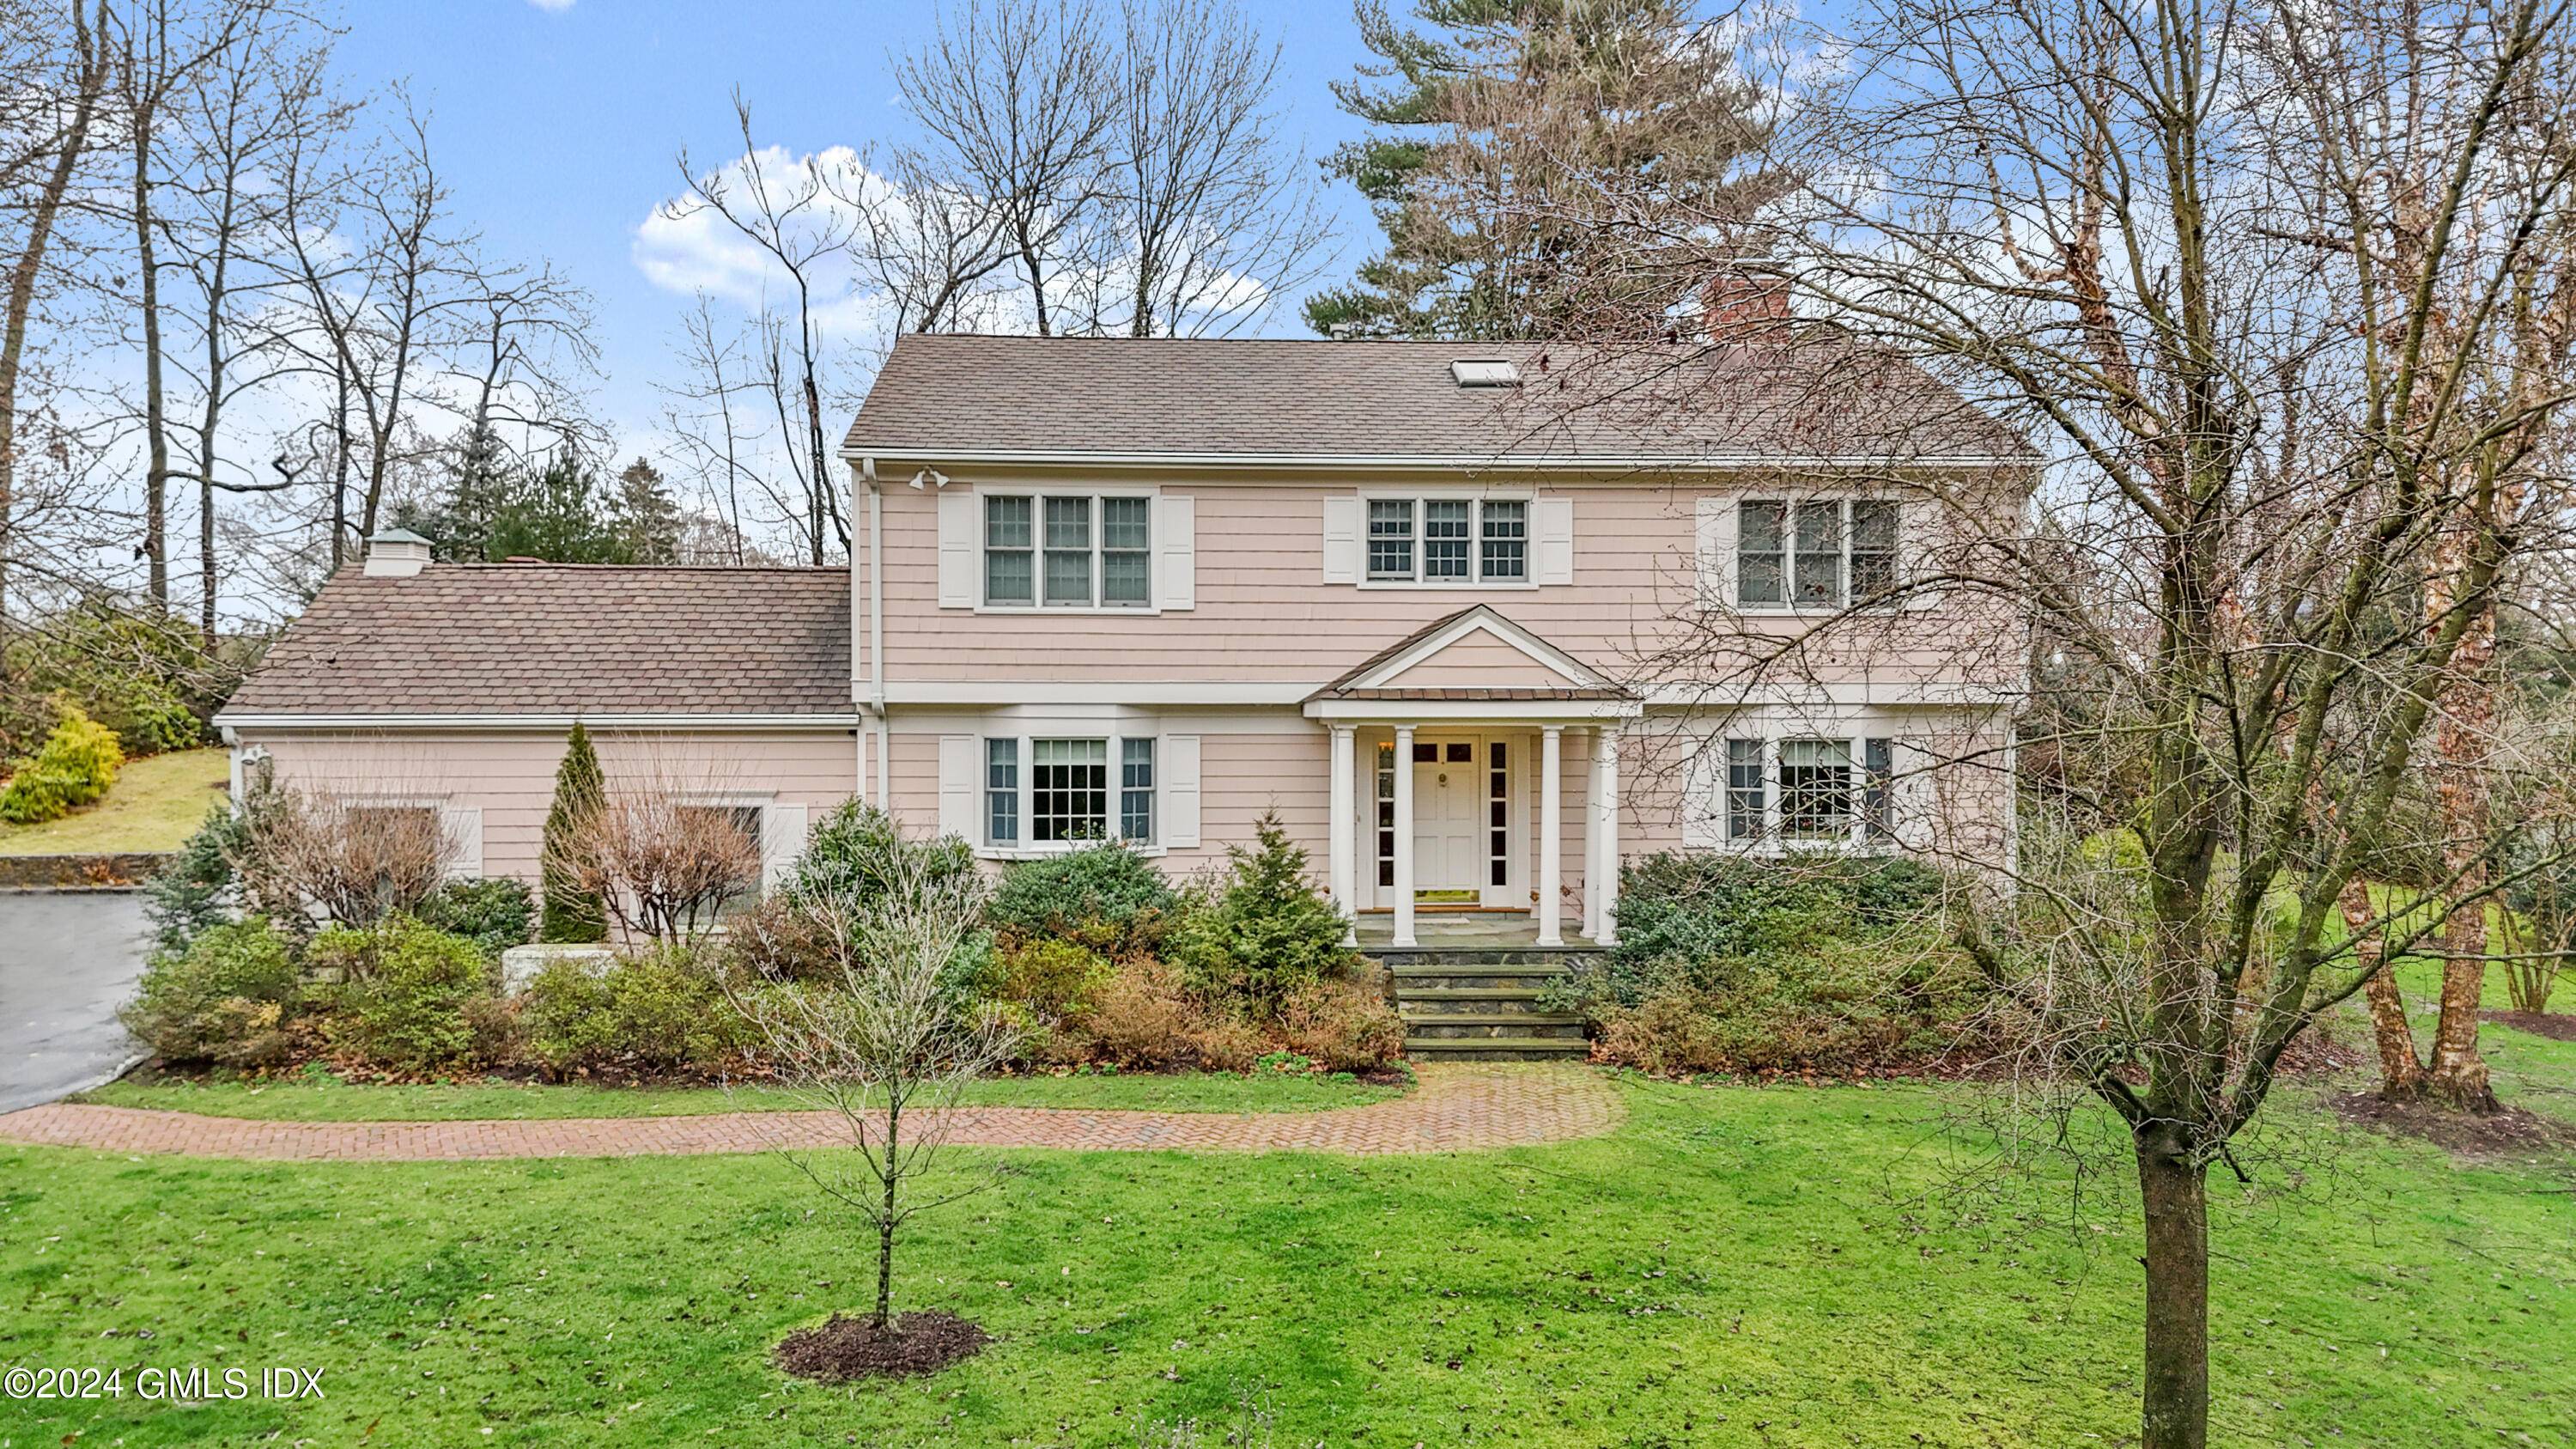 Experience serenity on this private Greenwich property, tucked away down a long driveway yet conveniently close to all the town offers.